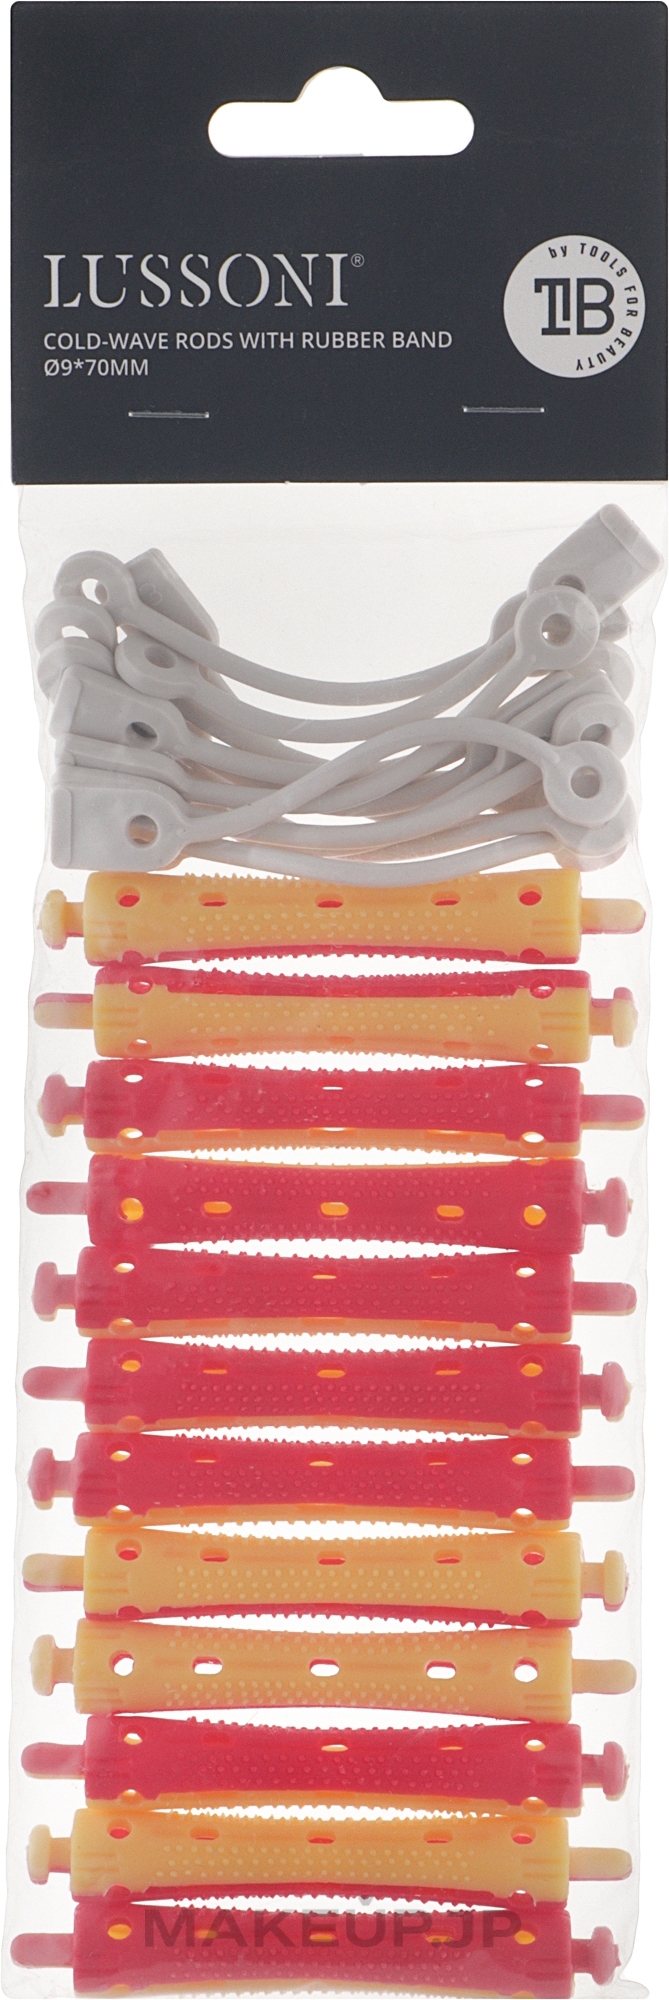 Hair Curlers O7x70 mm, red-yellow - Lussoni Cold-Wave Rods With Rubber Band — photo 12 szt.